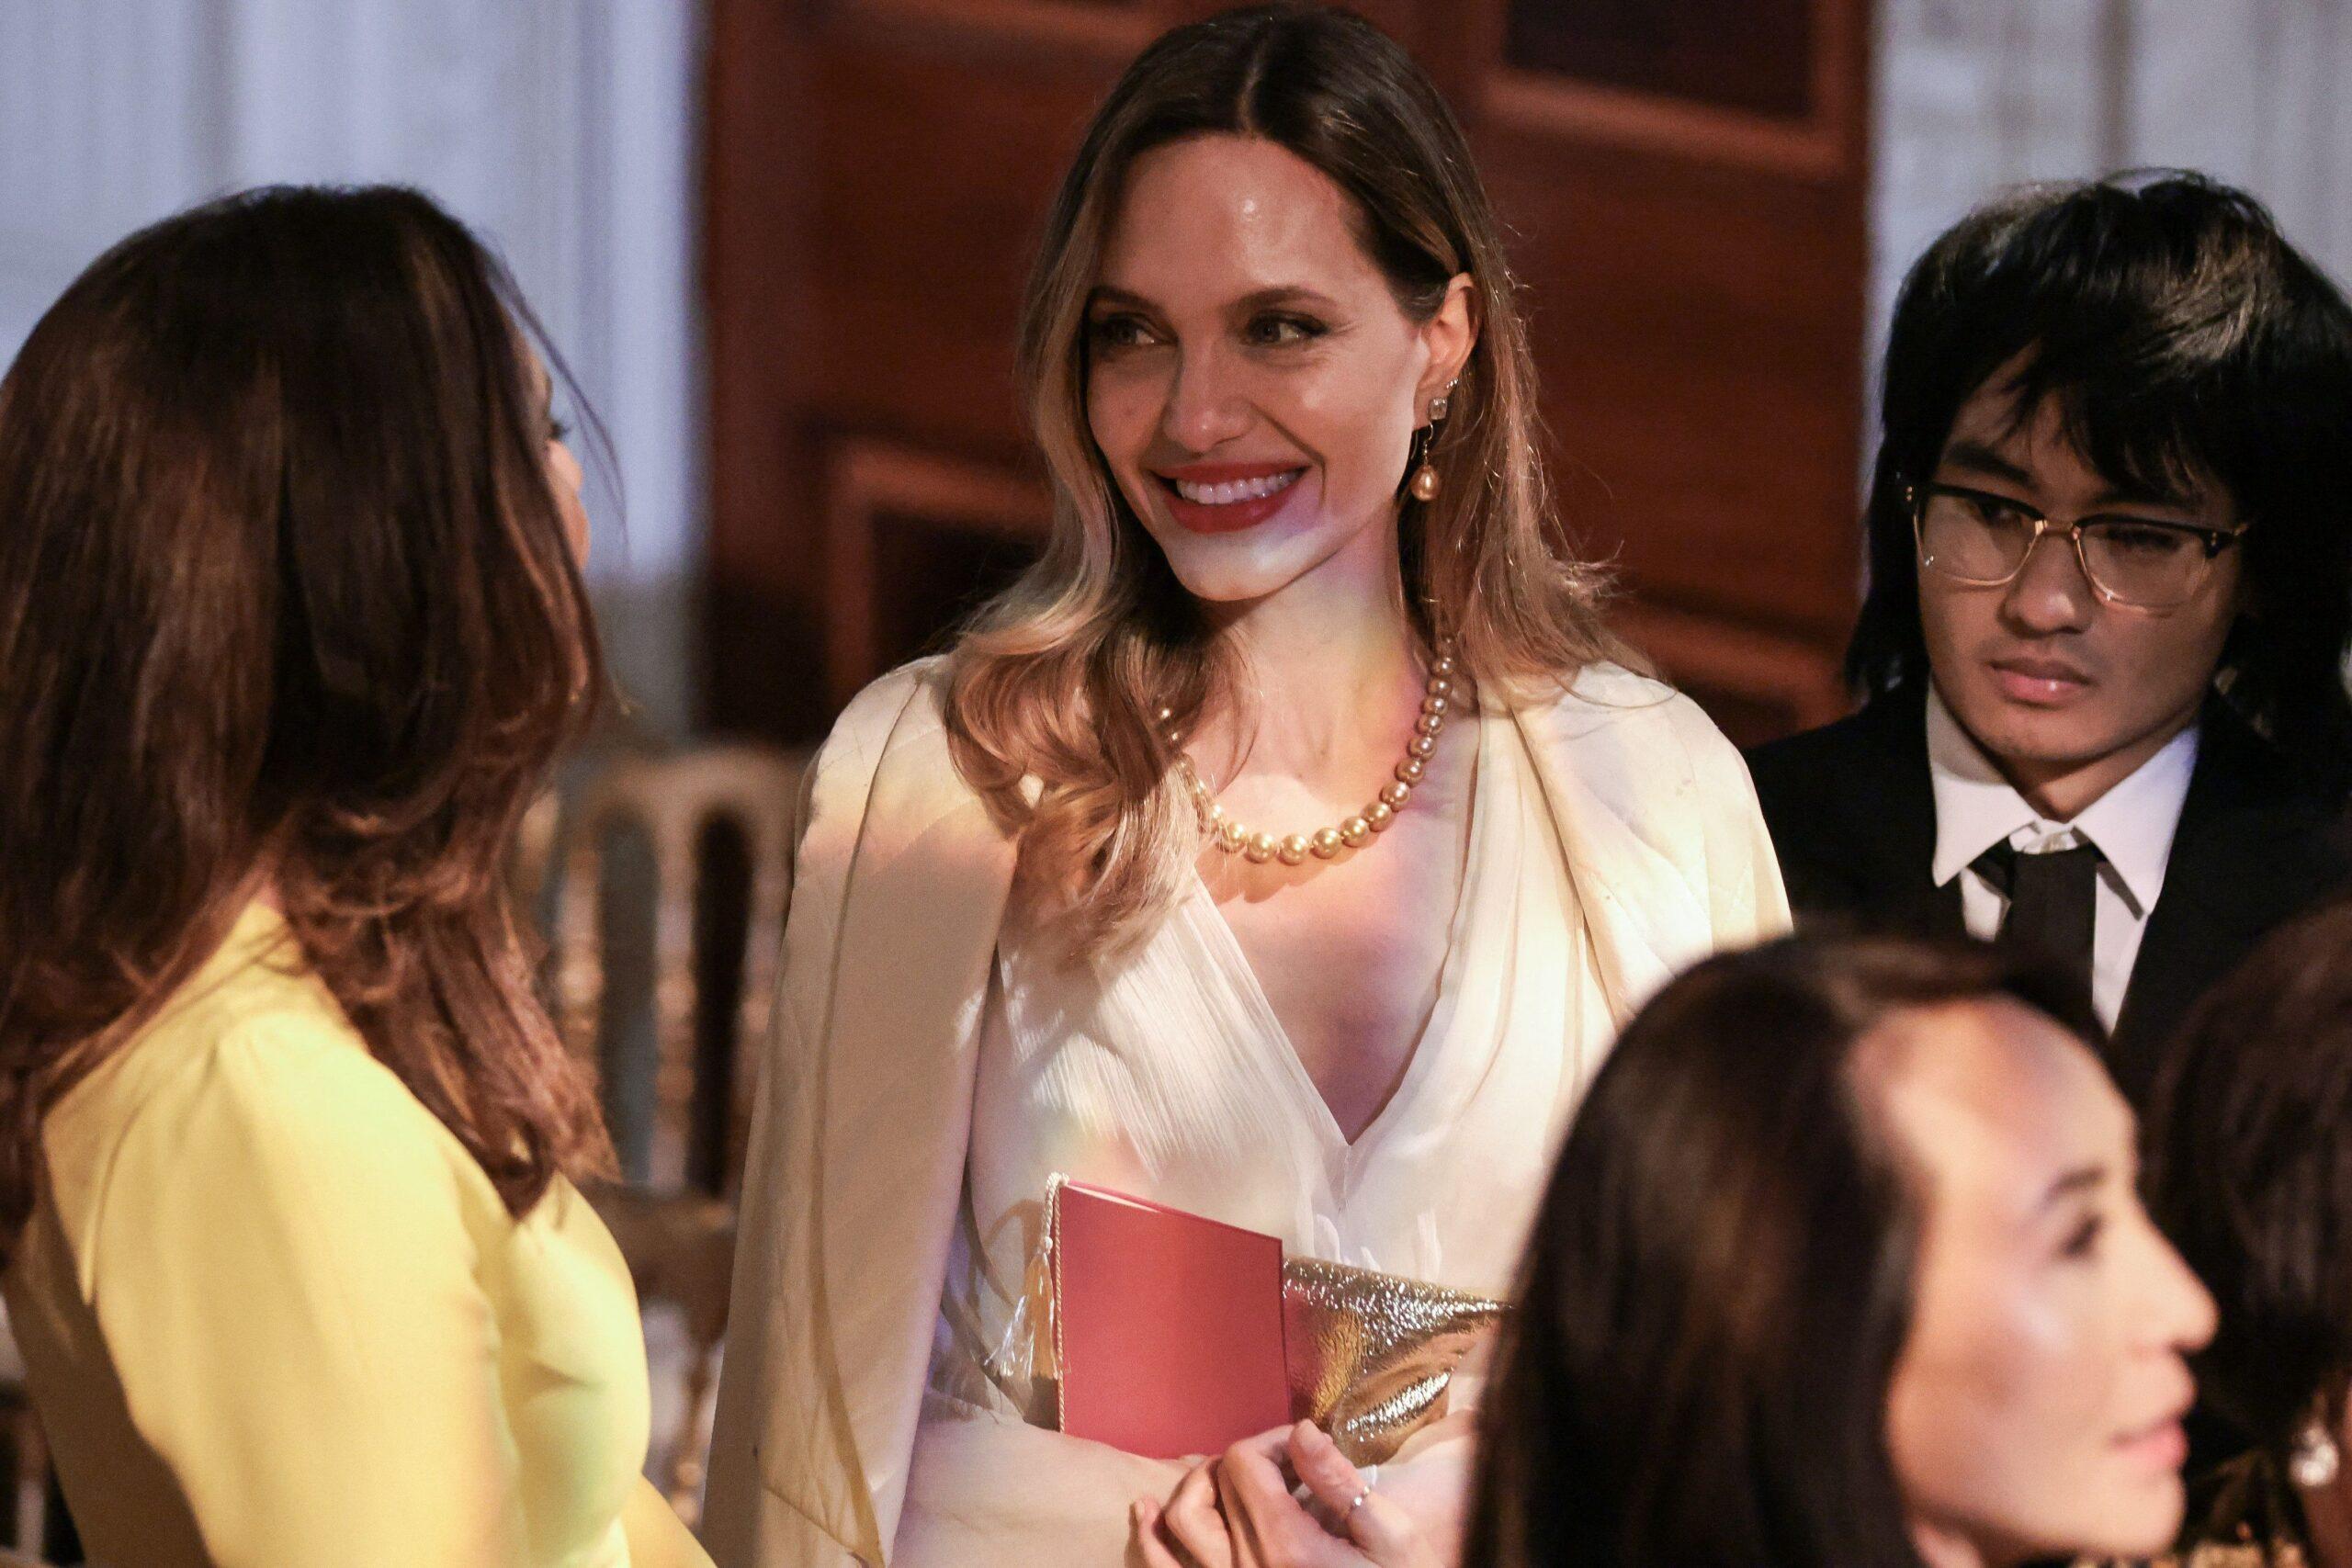 Proud Mama Angelina Jolie Attends White House Soirée With Son, Maddox